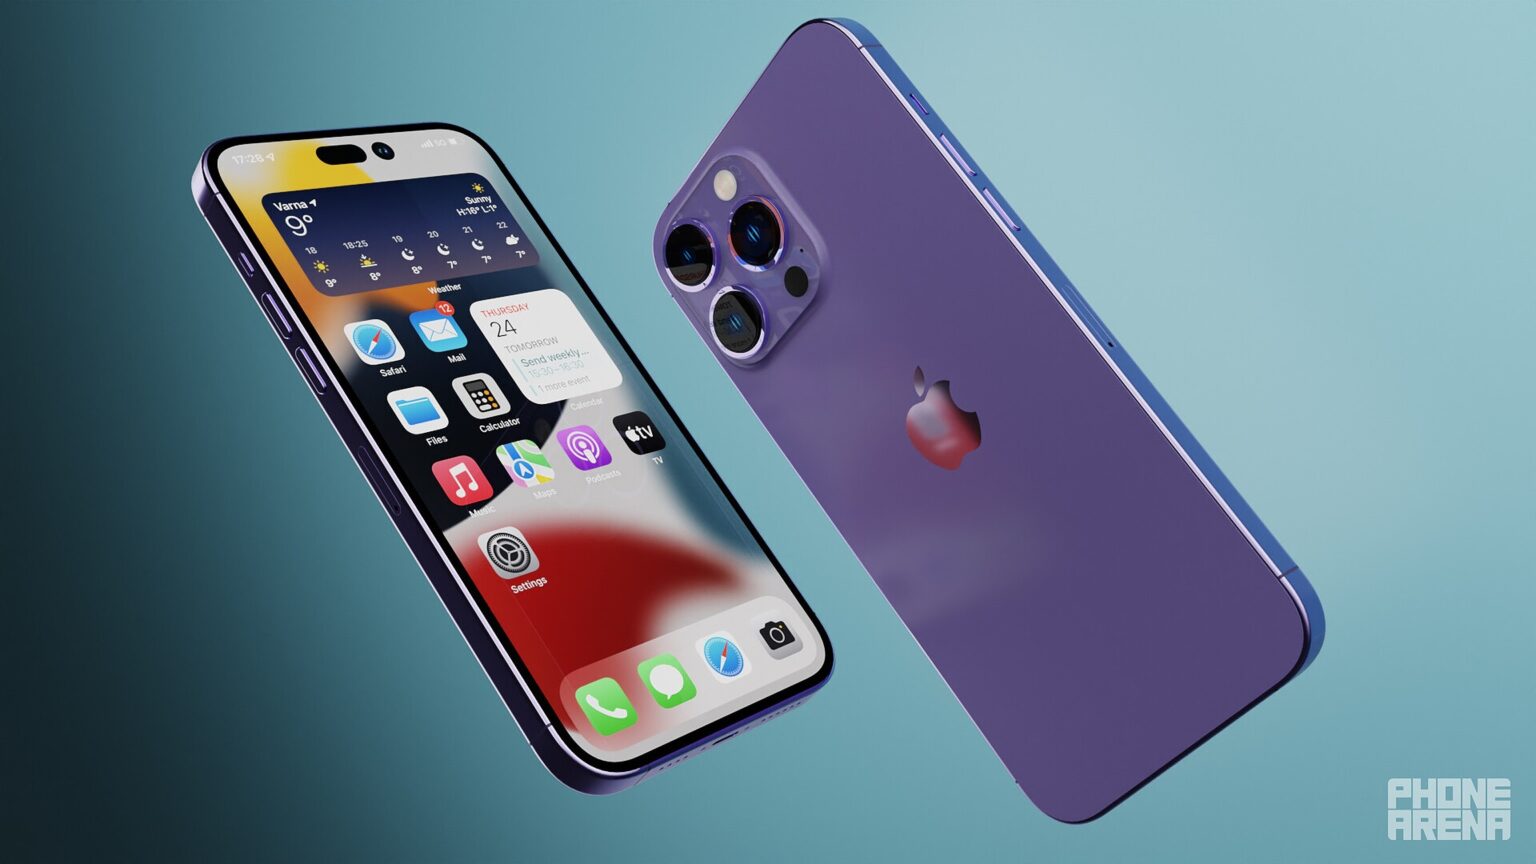 The release of the new iPhone is sure to cause a frenzy among consumers as they wait for the latest and greatest phone available on the market.